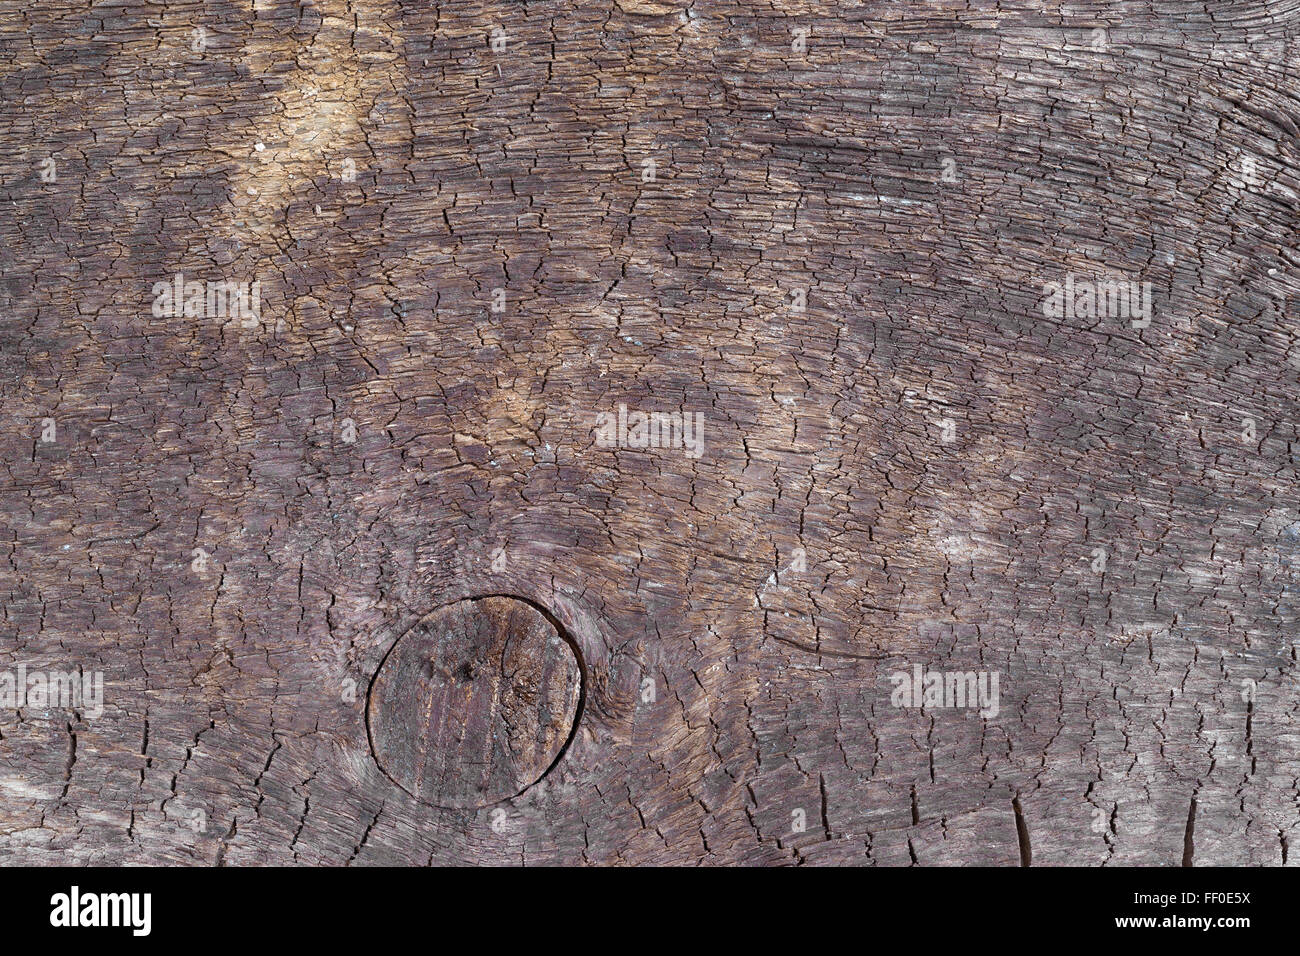 Close view of an old weathered board with a large knot and cracks illuminated with natural light. Stock Photo